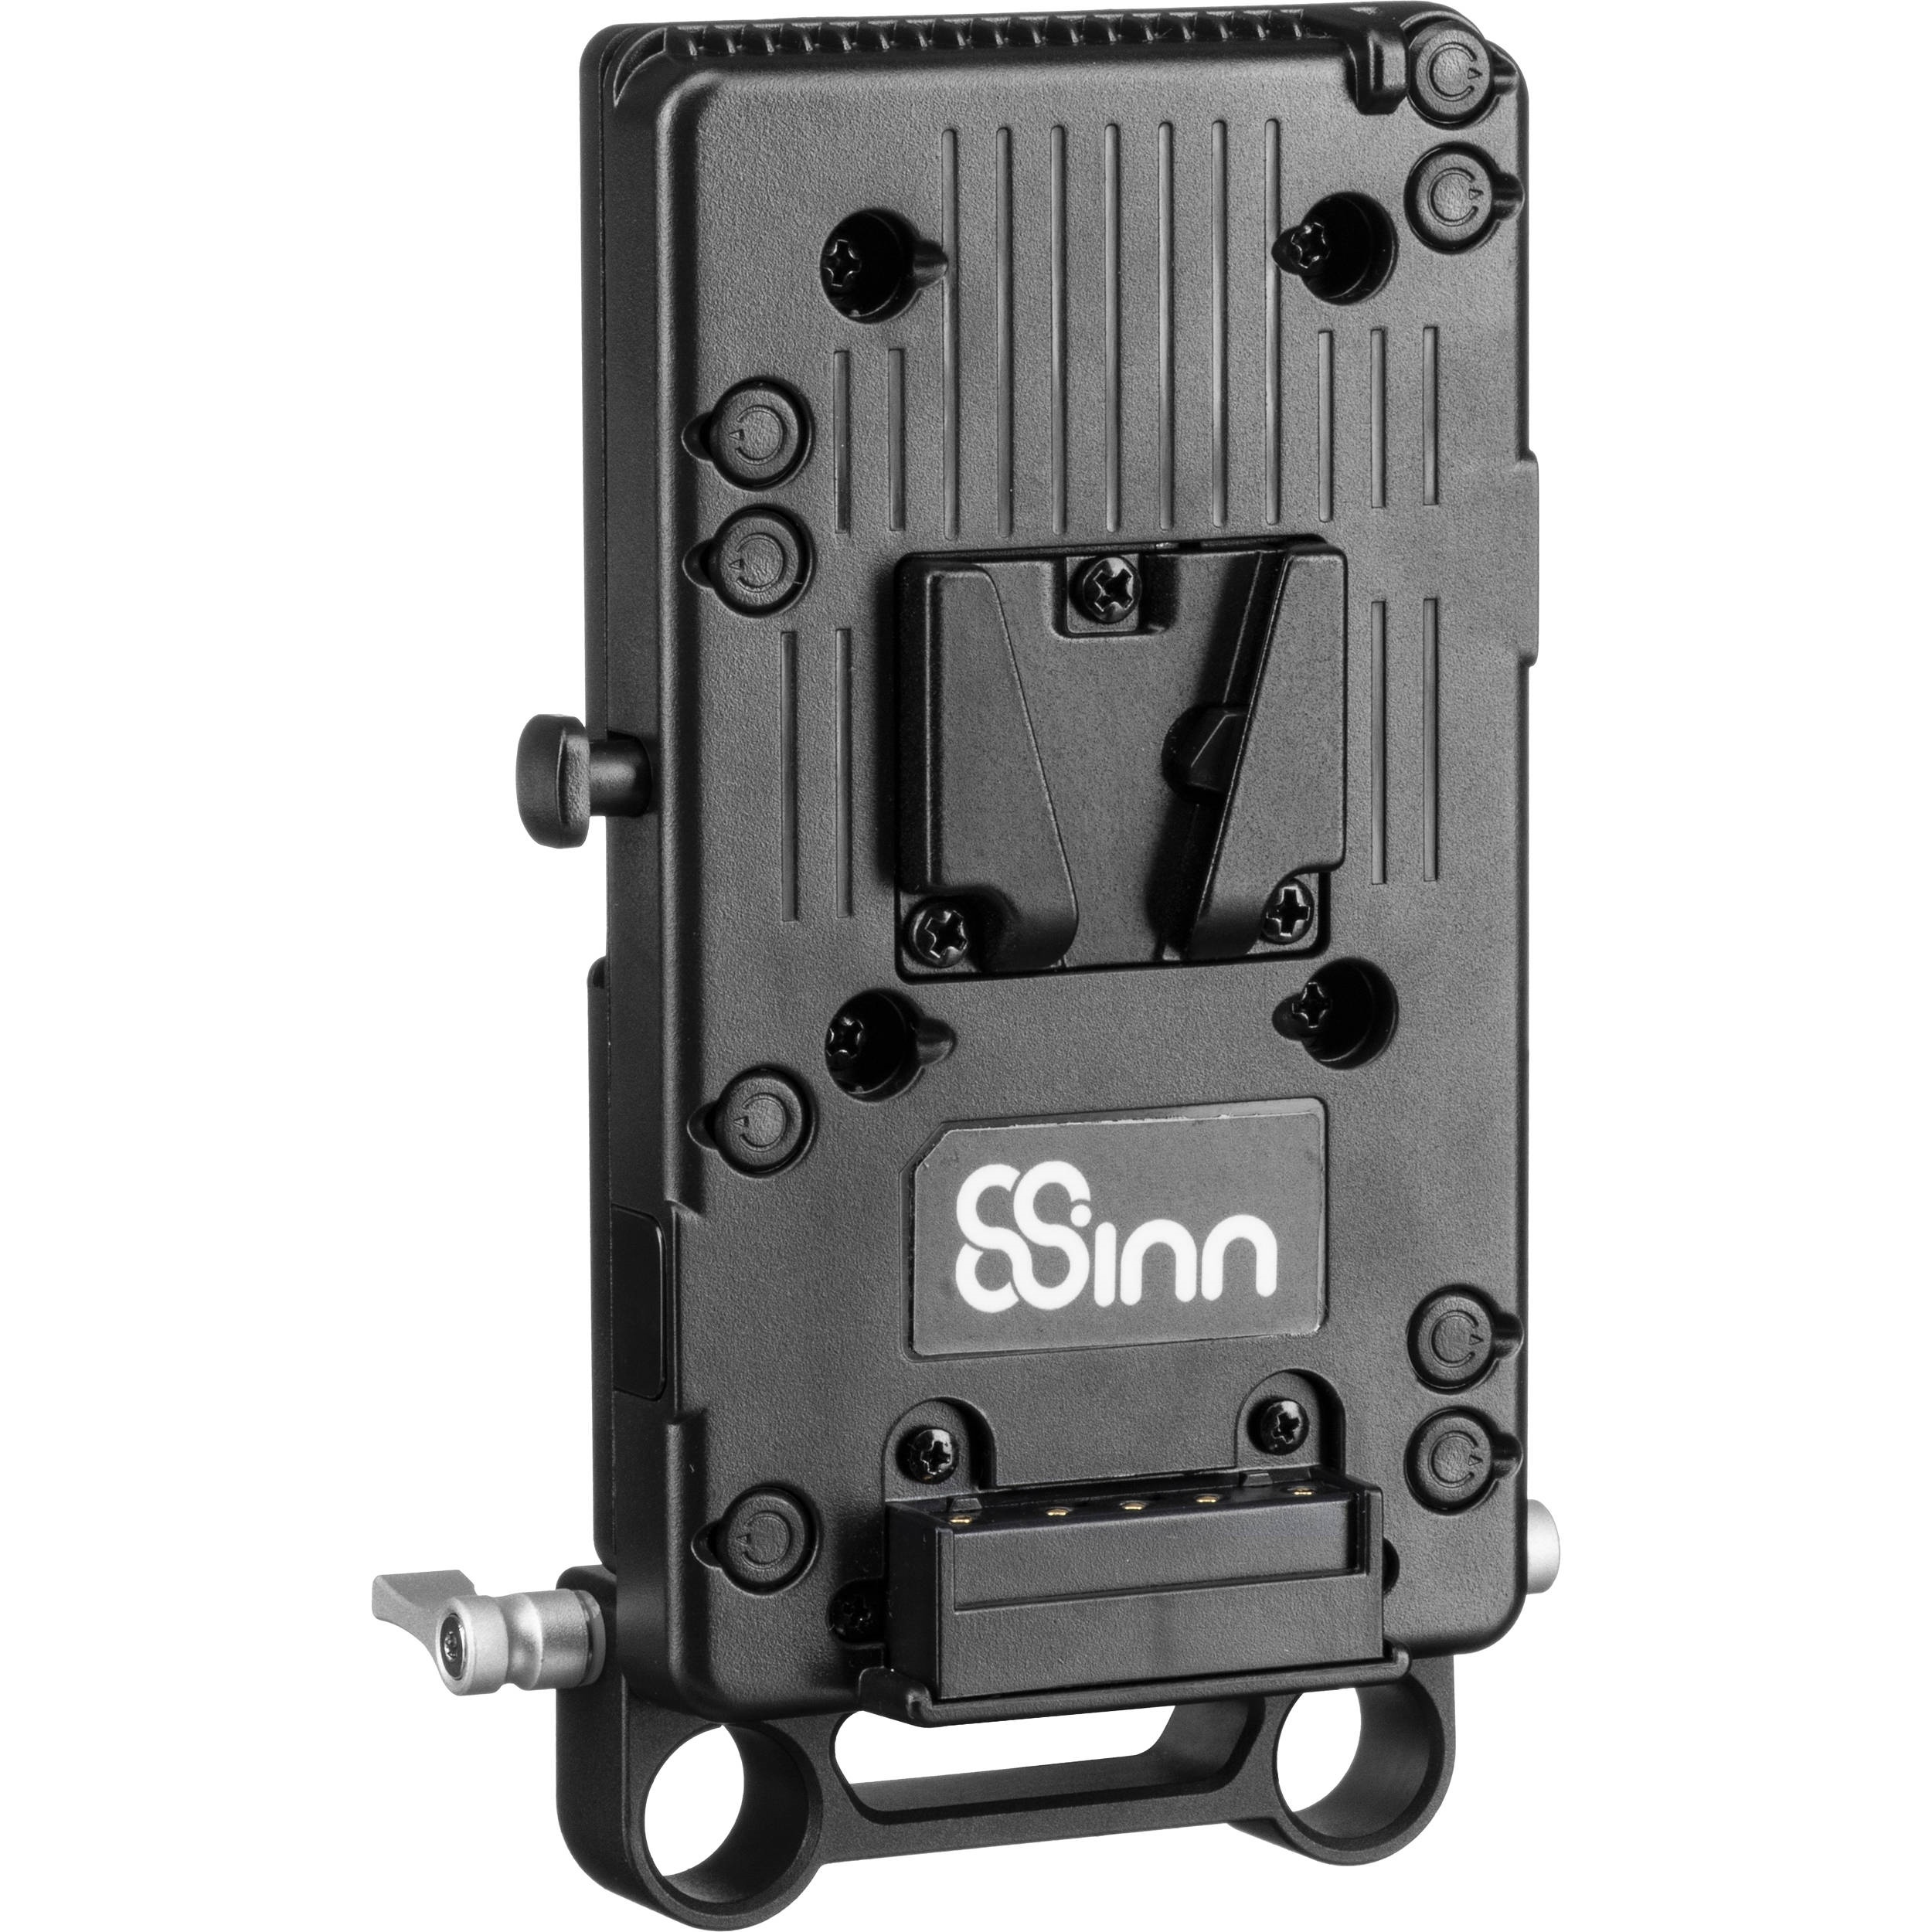 8Sinn Battery Mounting Plate Kit with 15mm Rod Clamp & V-Mount Battery Plate